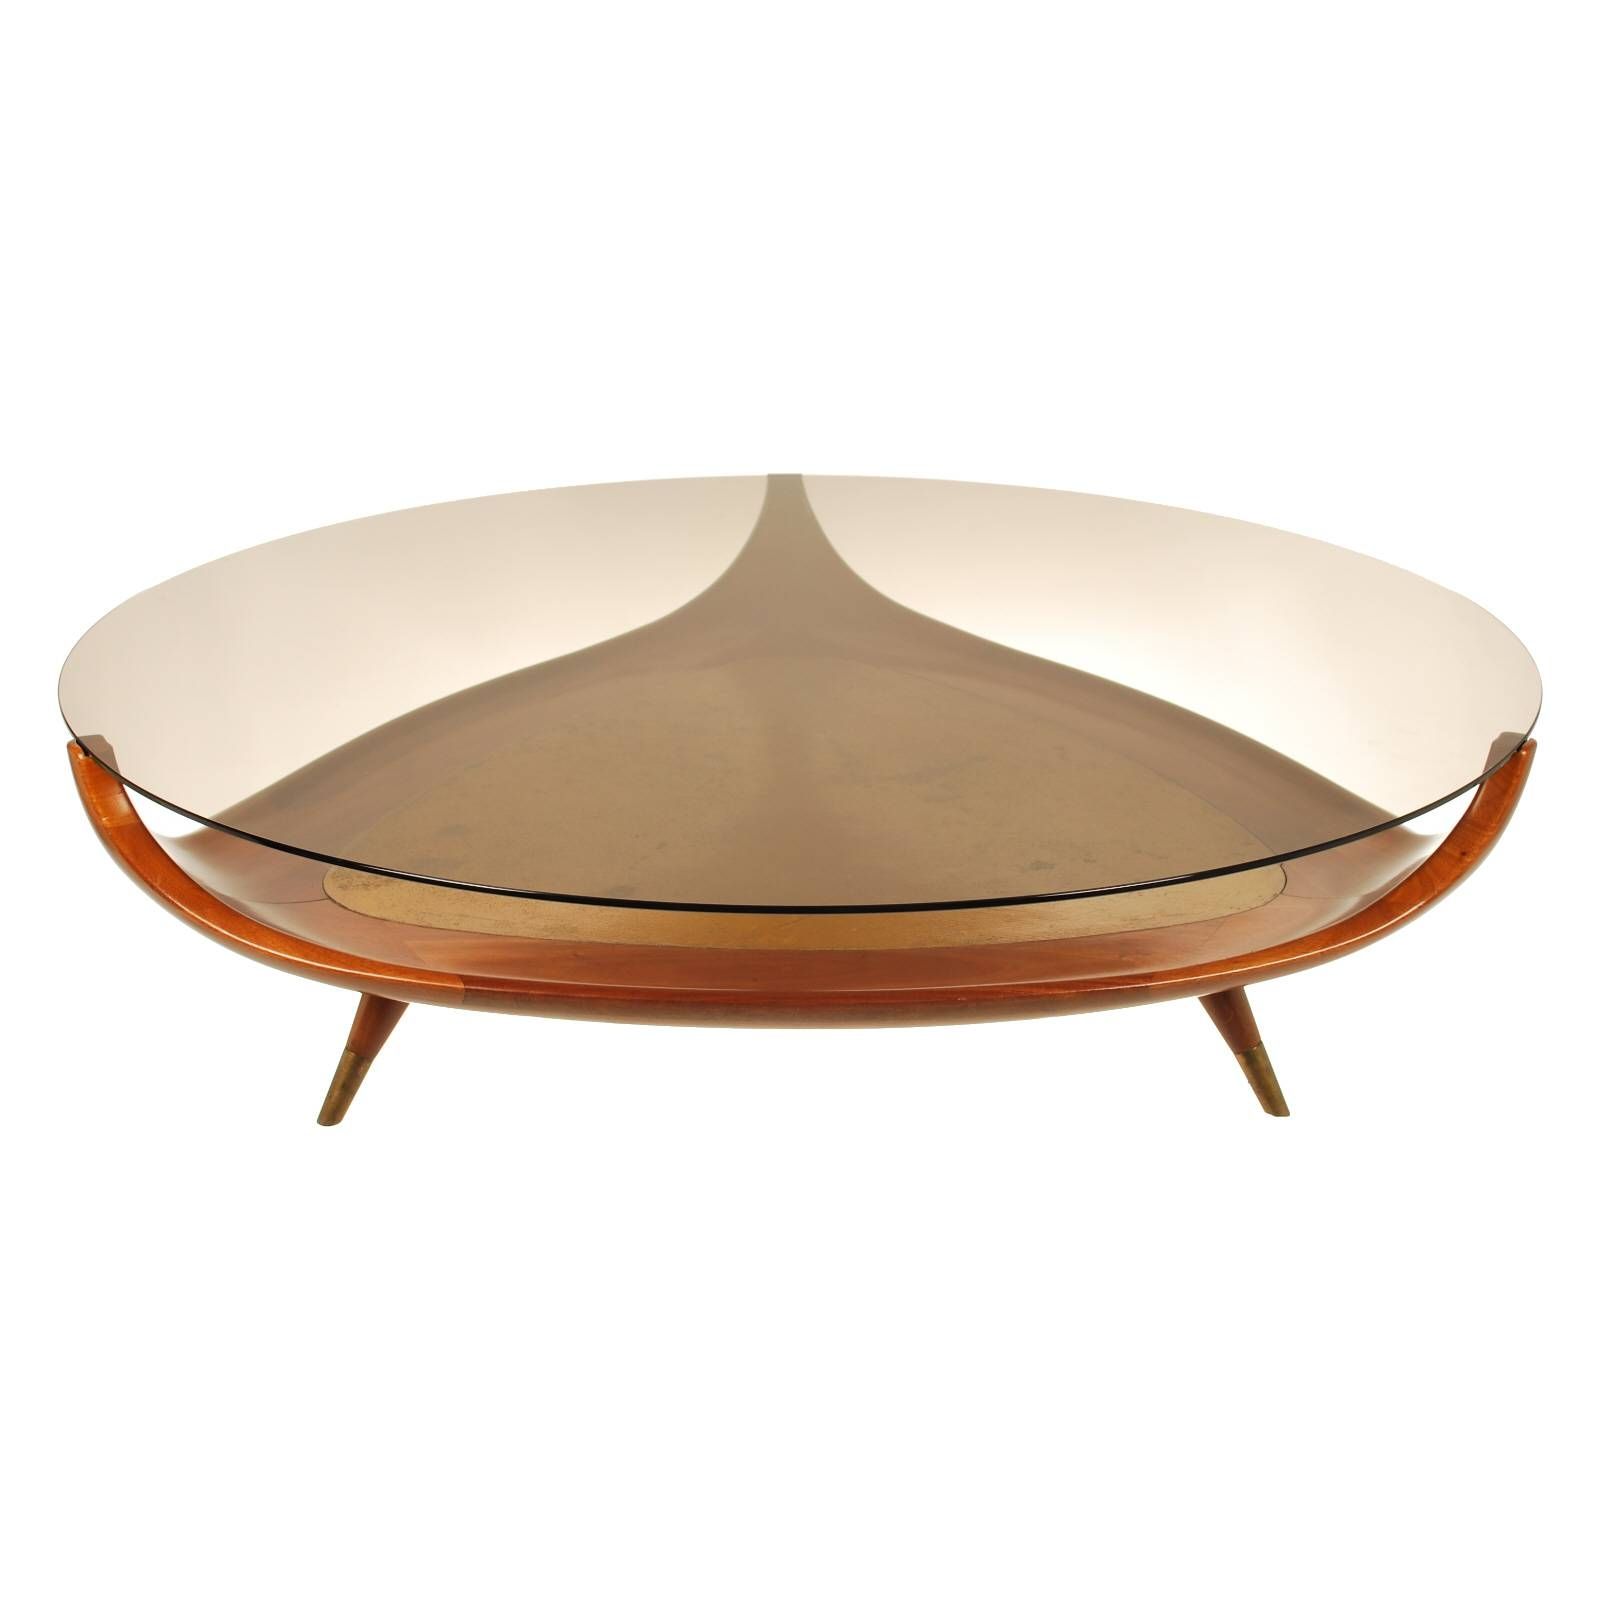 Coffee Table: Wonderful Oval Coffee Tables For Sale Oval Coffee With Black Oval Coffee Tables (View 23 of 30)